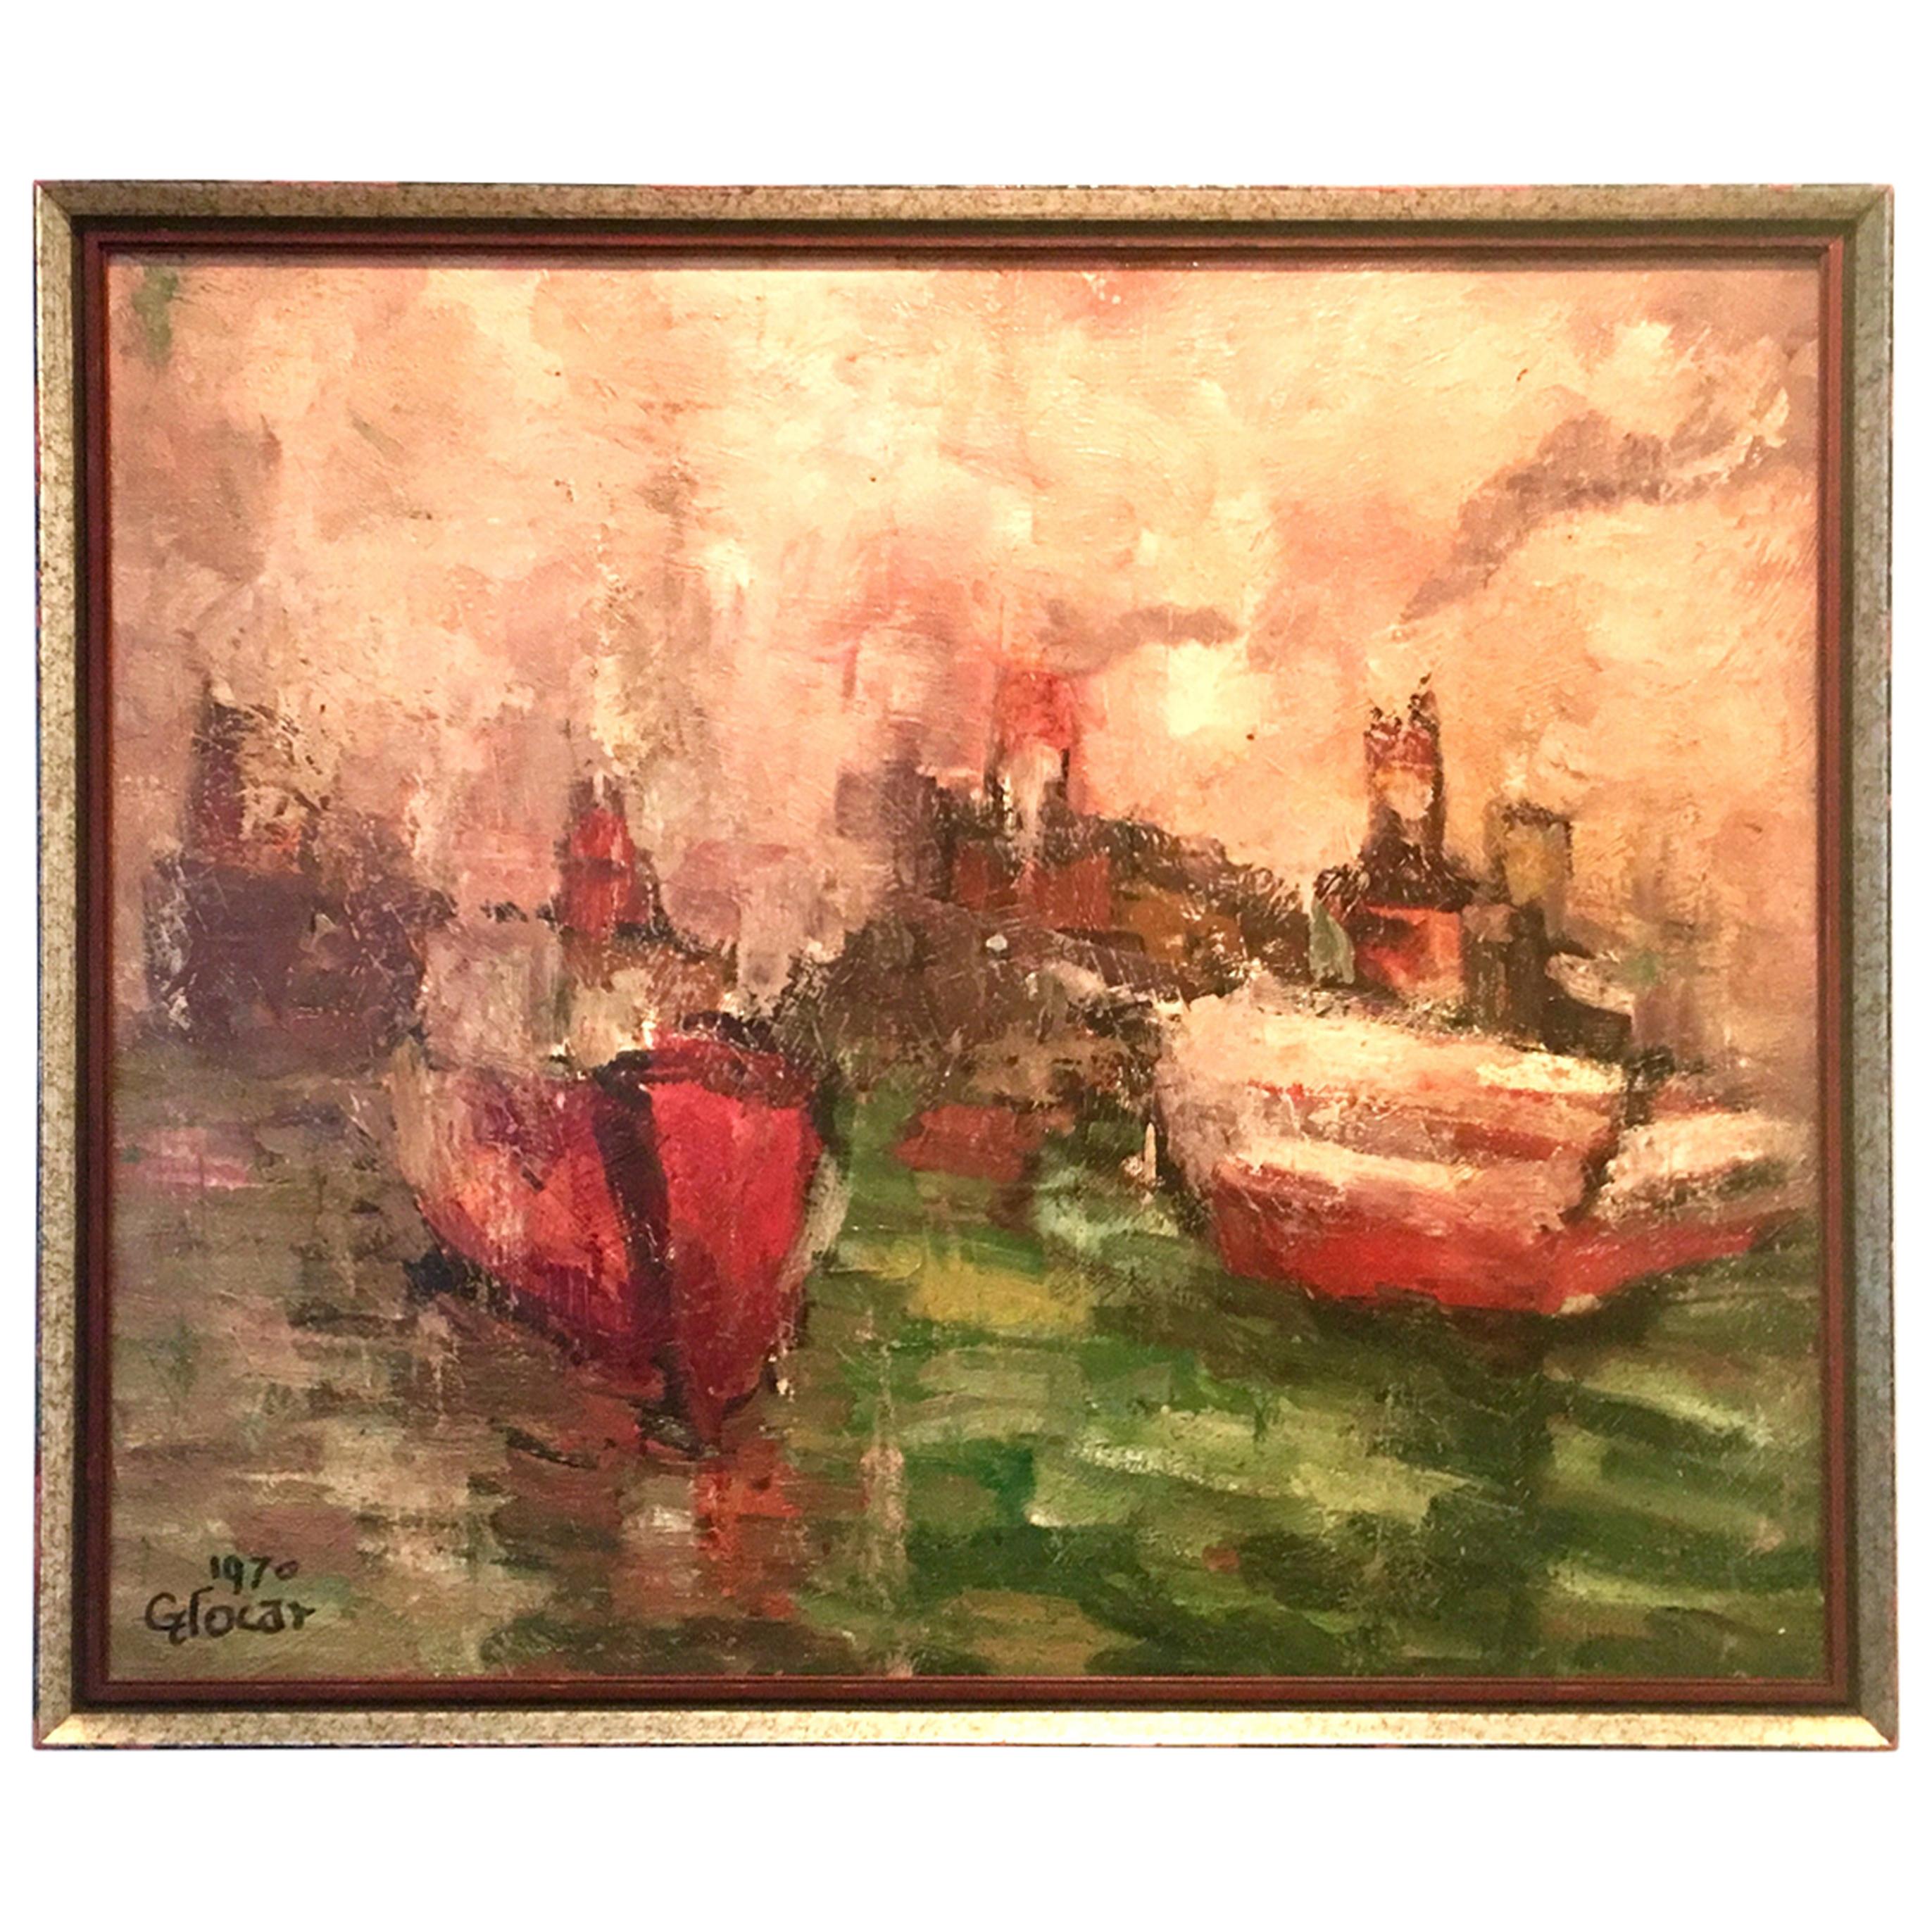 1970 Original Oil on Canvas Abstract Painting By, Emilan Glocar For Sale